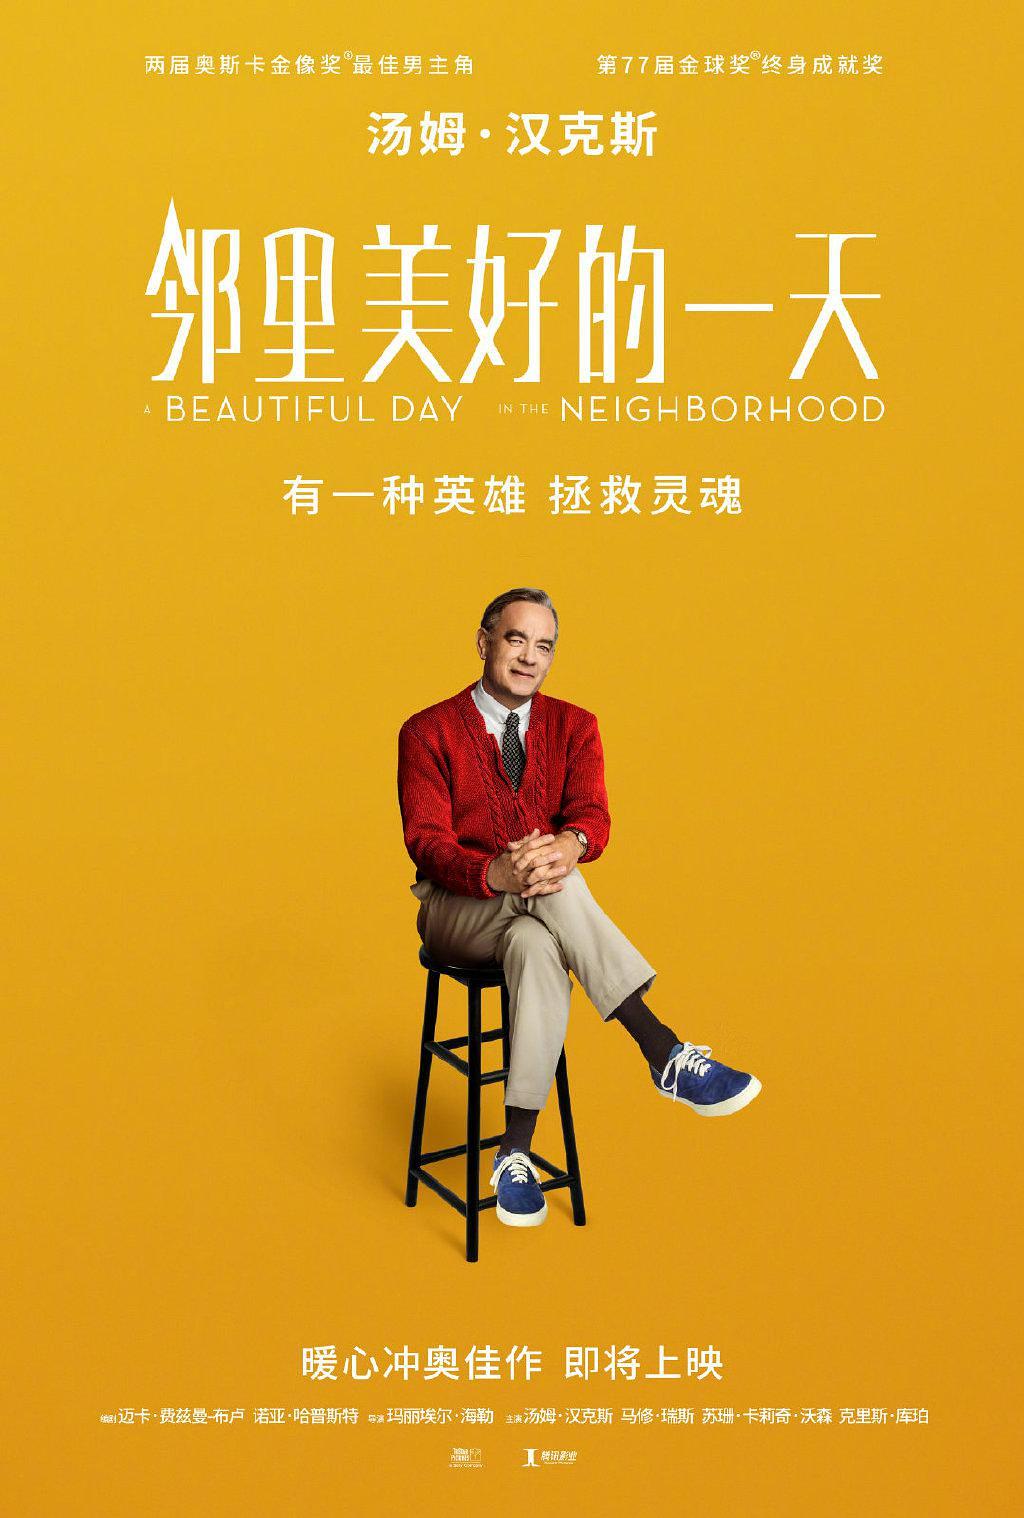 õһ A.Beautiful.Day.in.the.Neighborhood.2019.720p.BluRay.x264-DRONES 5.48GB-1.png